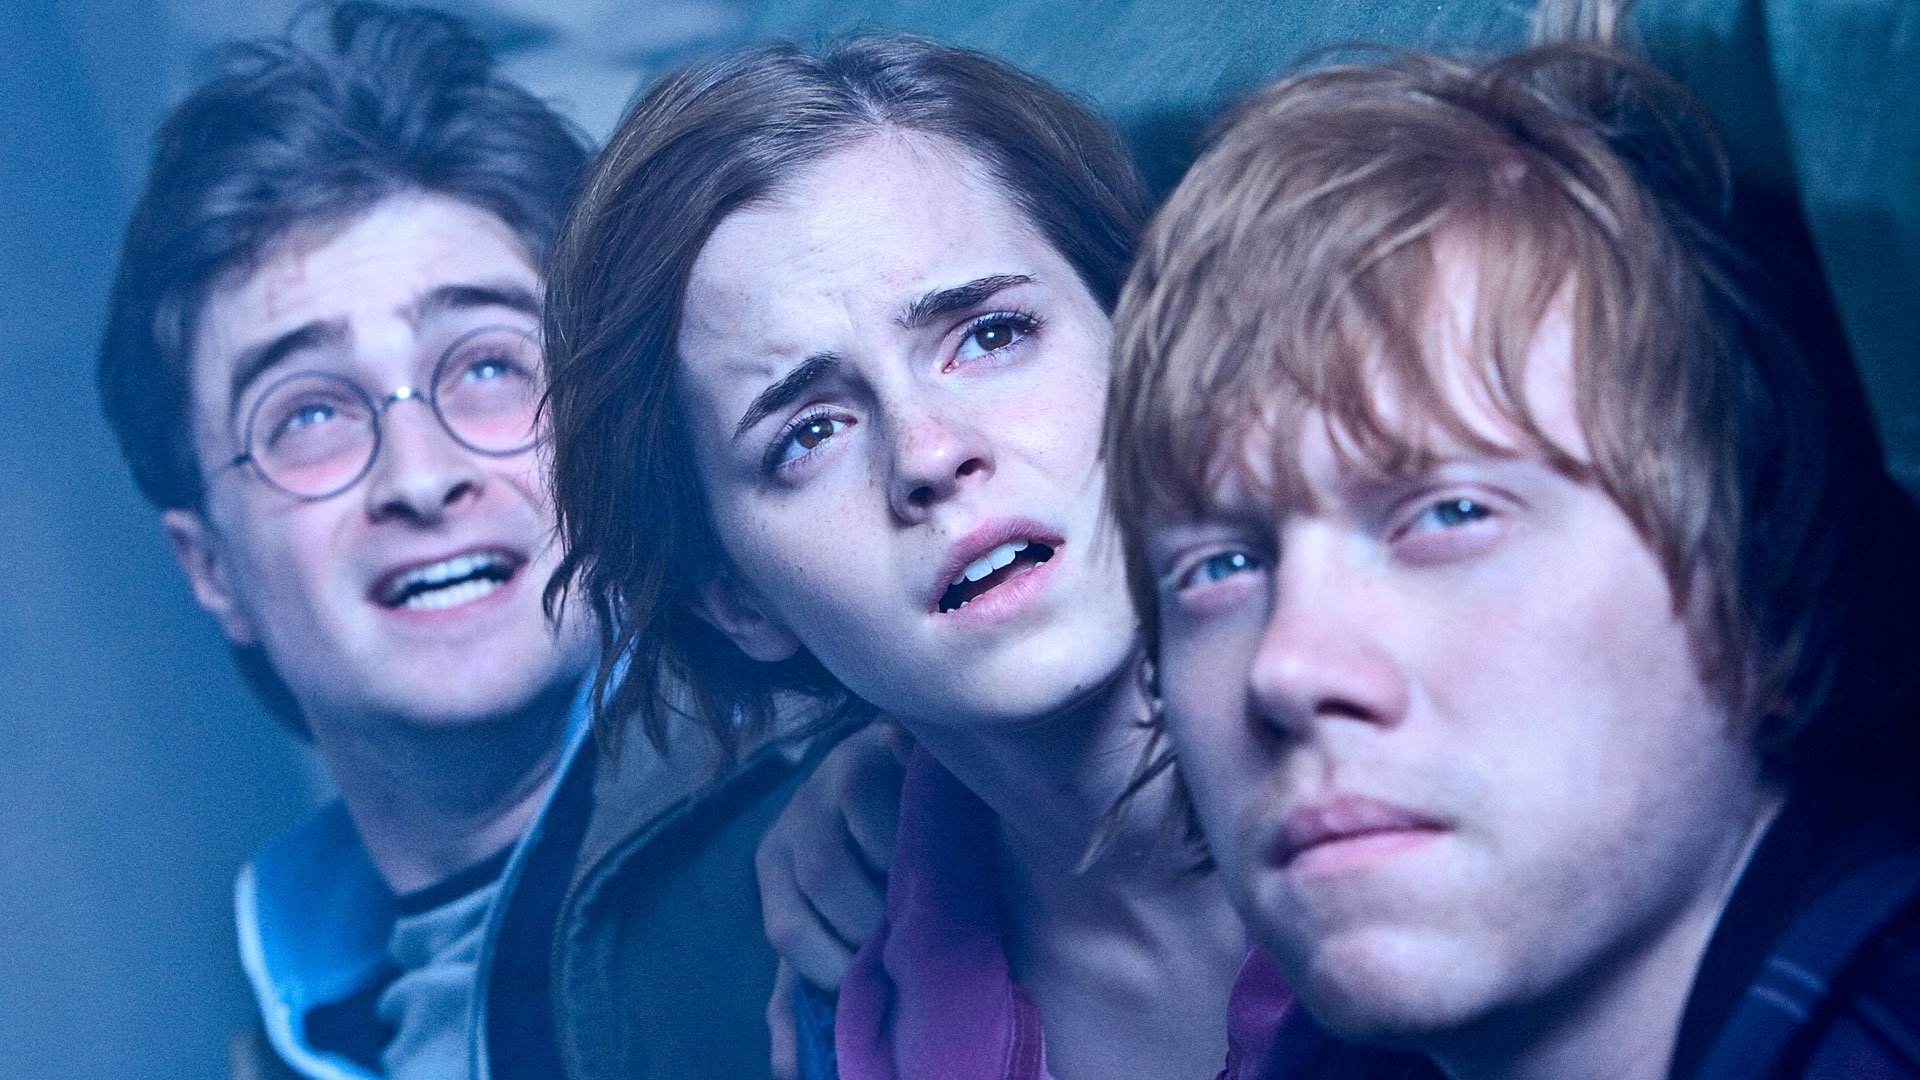 Daniel Radcliffe, Emma Watson and Rupert Grint in Harry Potter and the Deathly Hallows – Part 2. Photo: PictureLux / The Hollywood Archive / Alamy Stock Photo